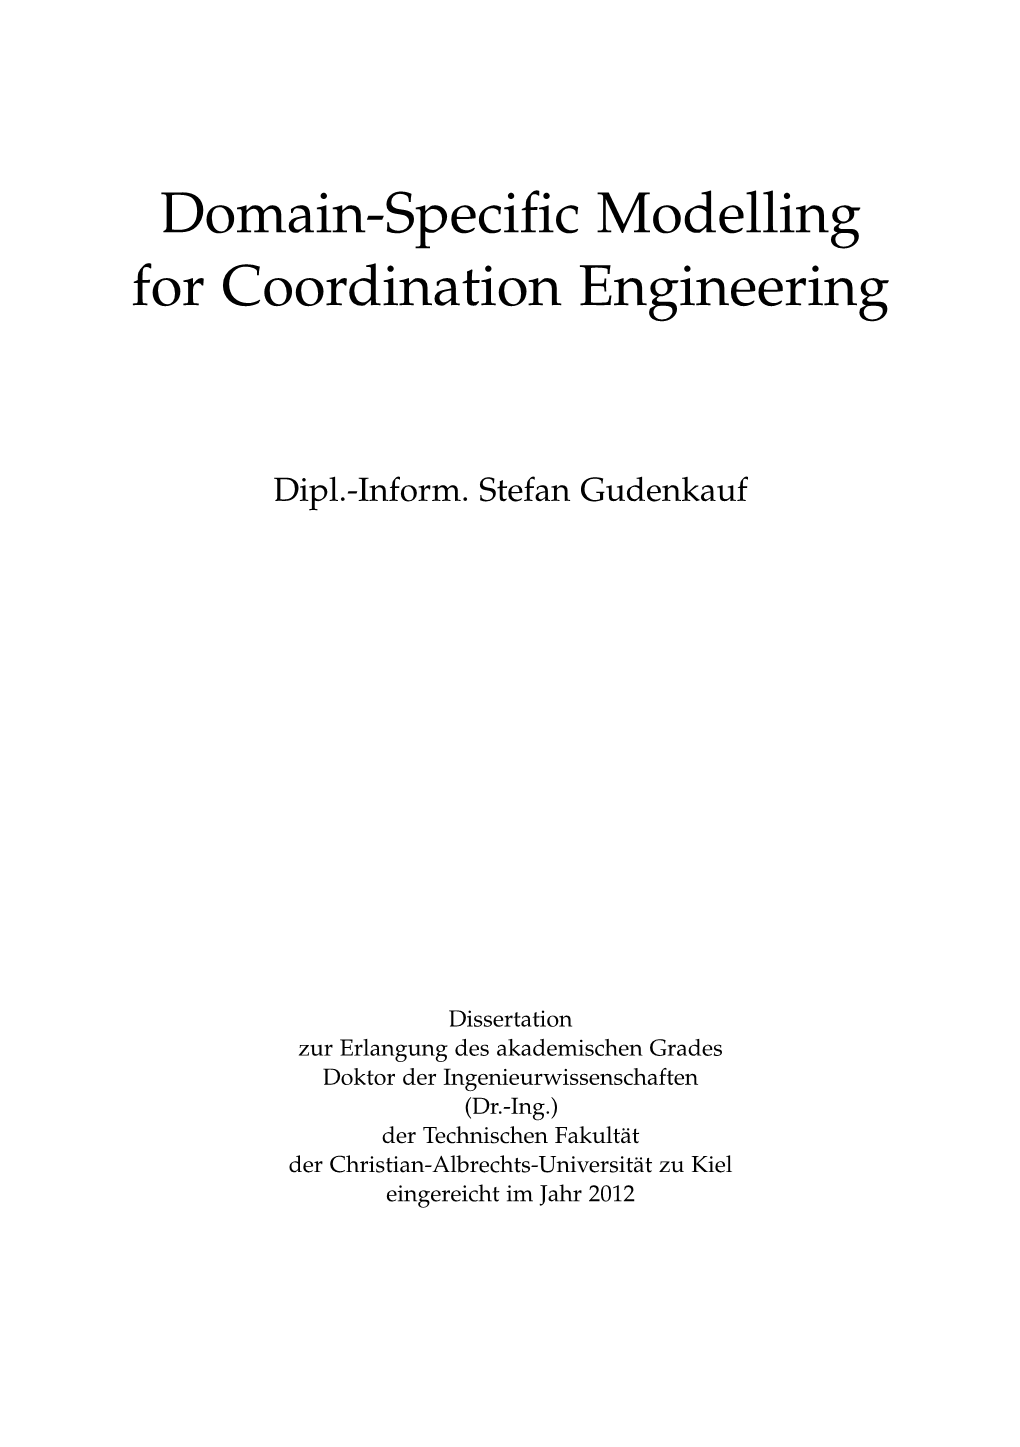 Domain-Specific Modelling for Coordination Engineering